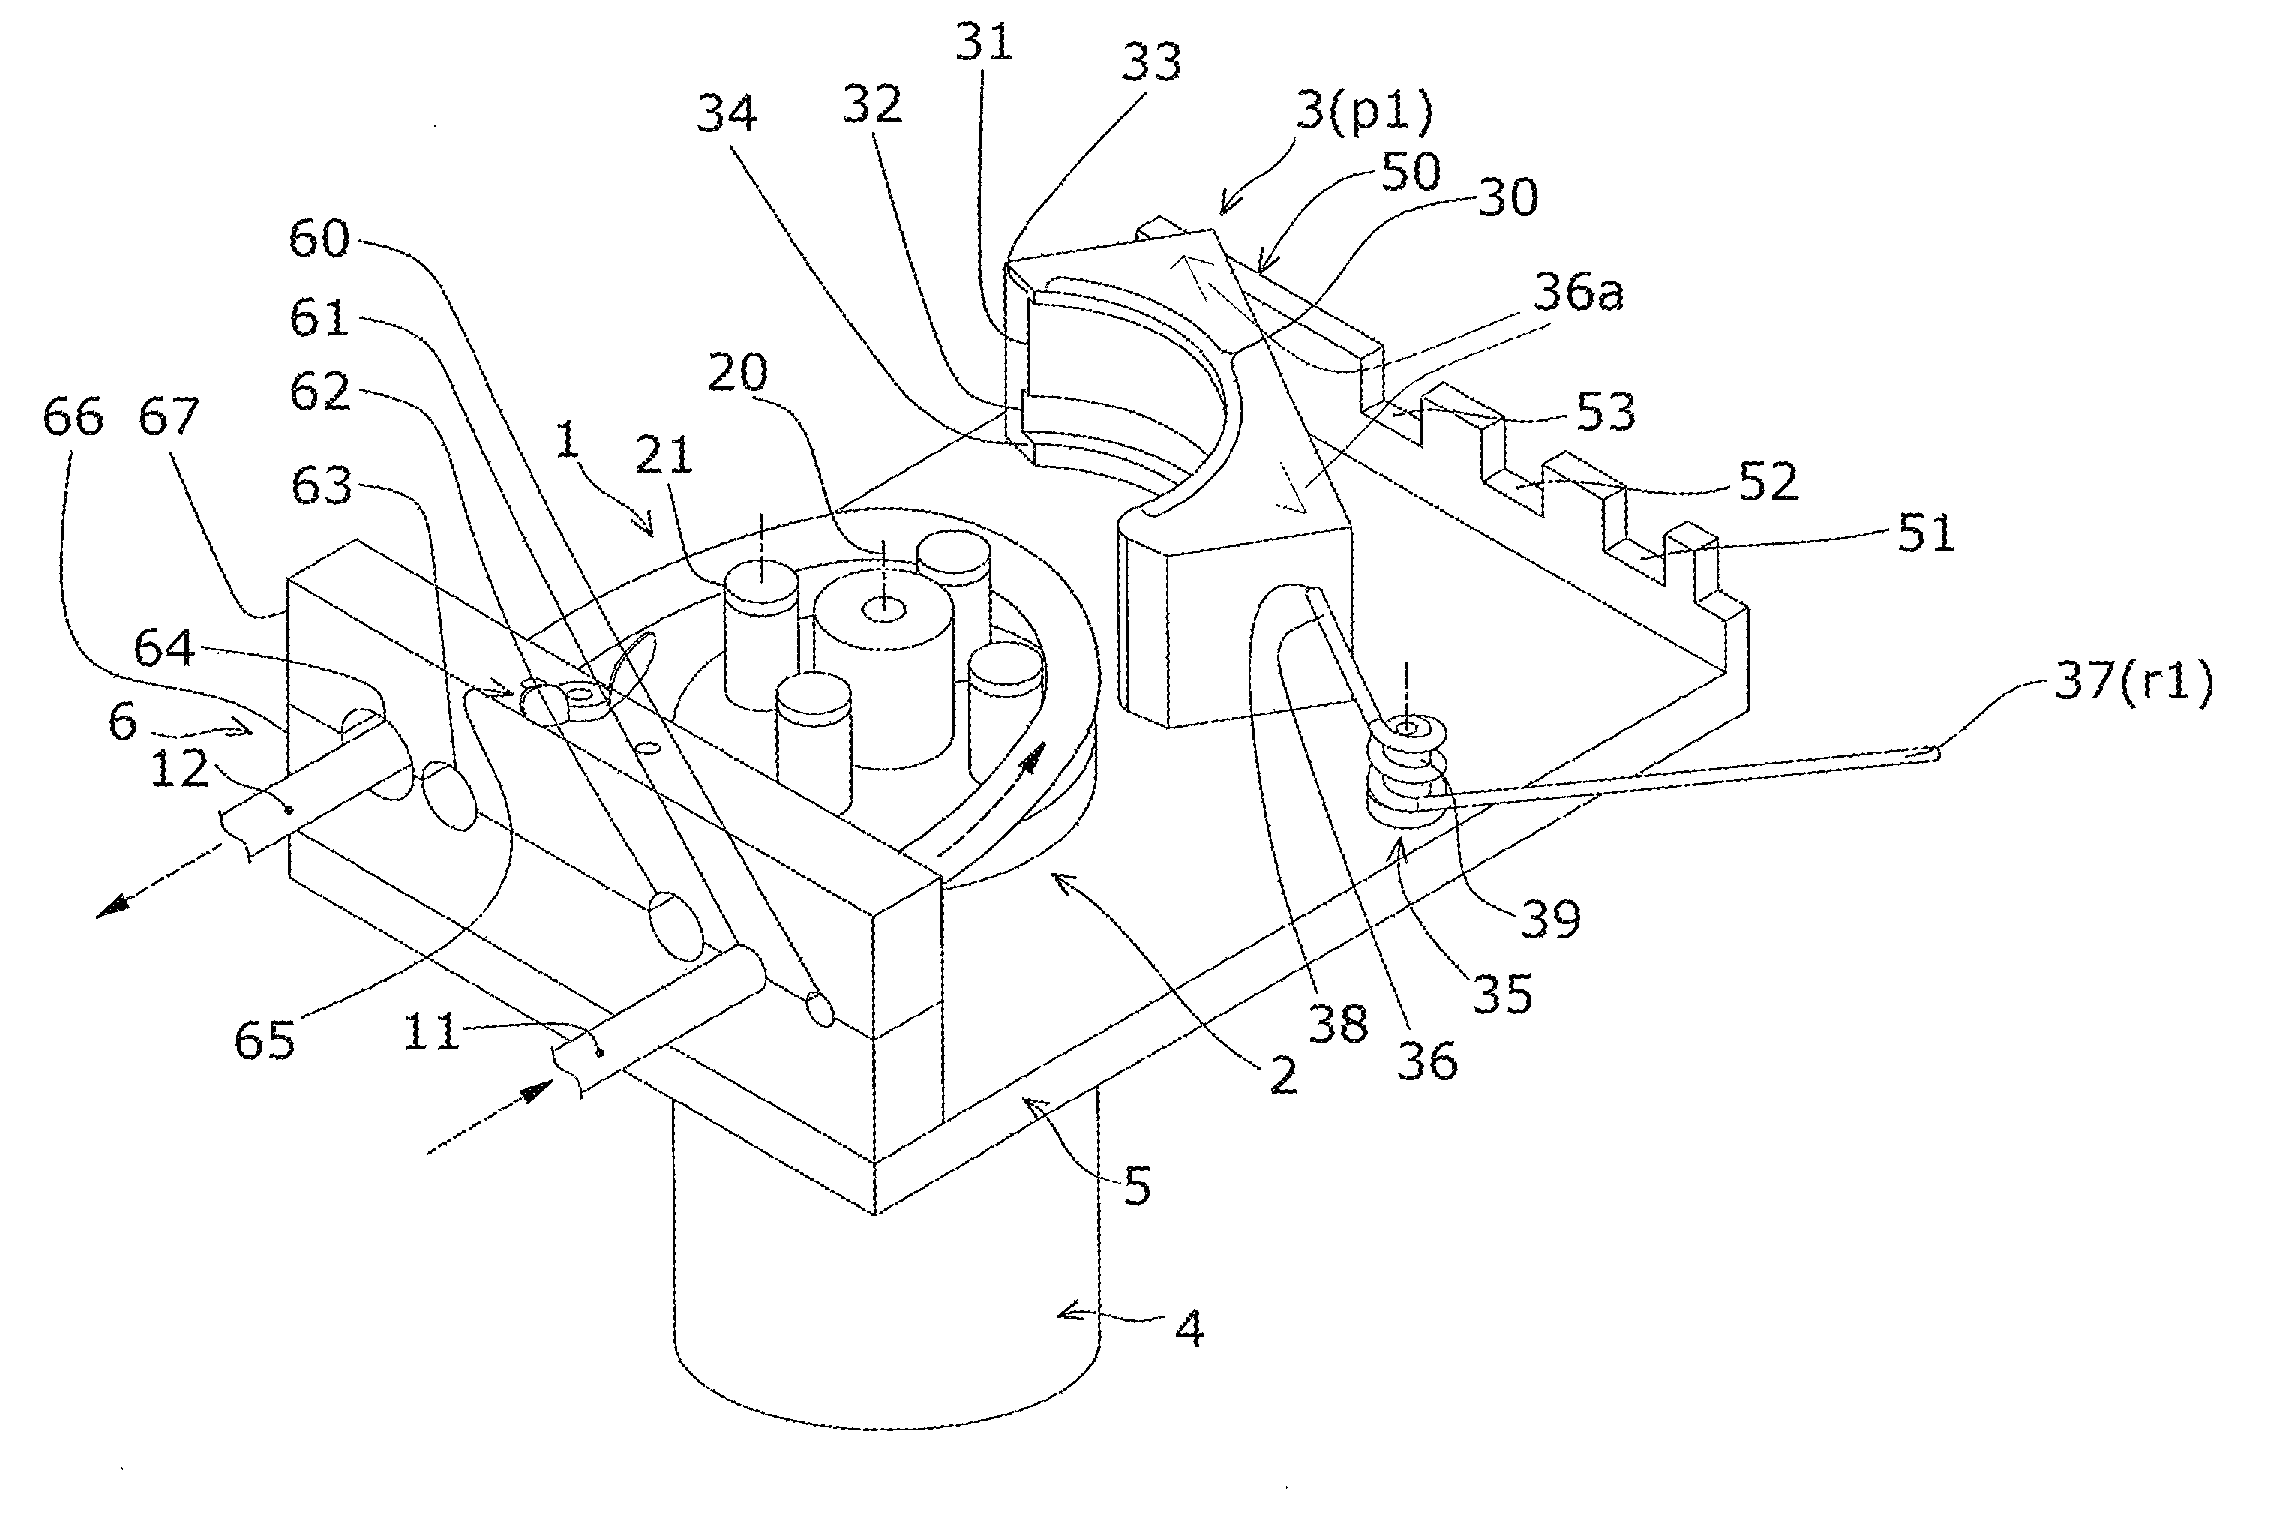 Tube loading assembly for peristaltic pump